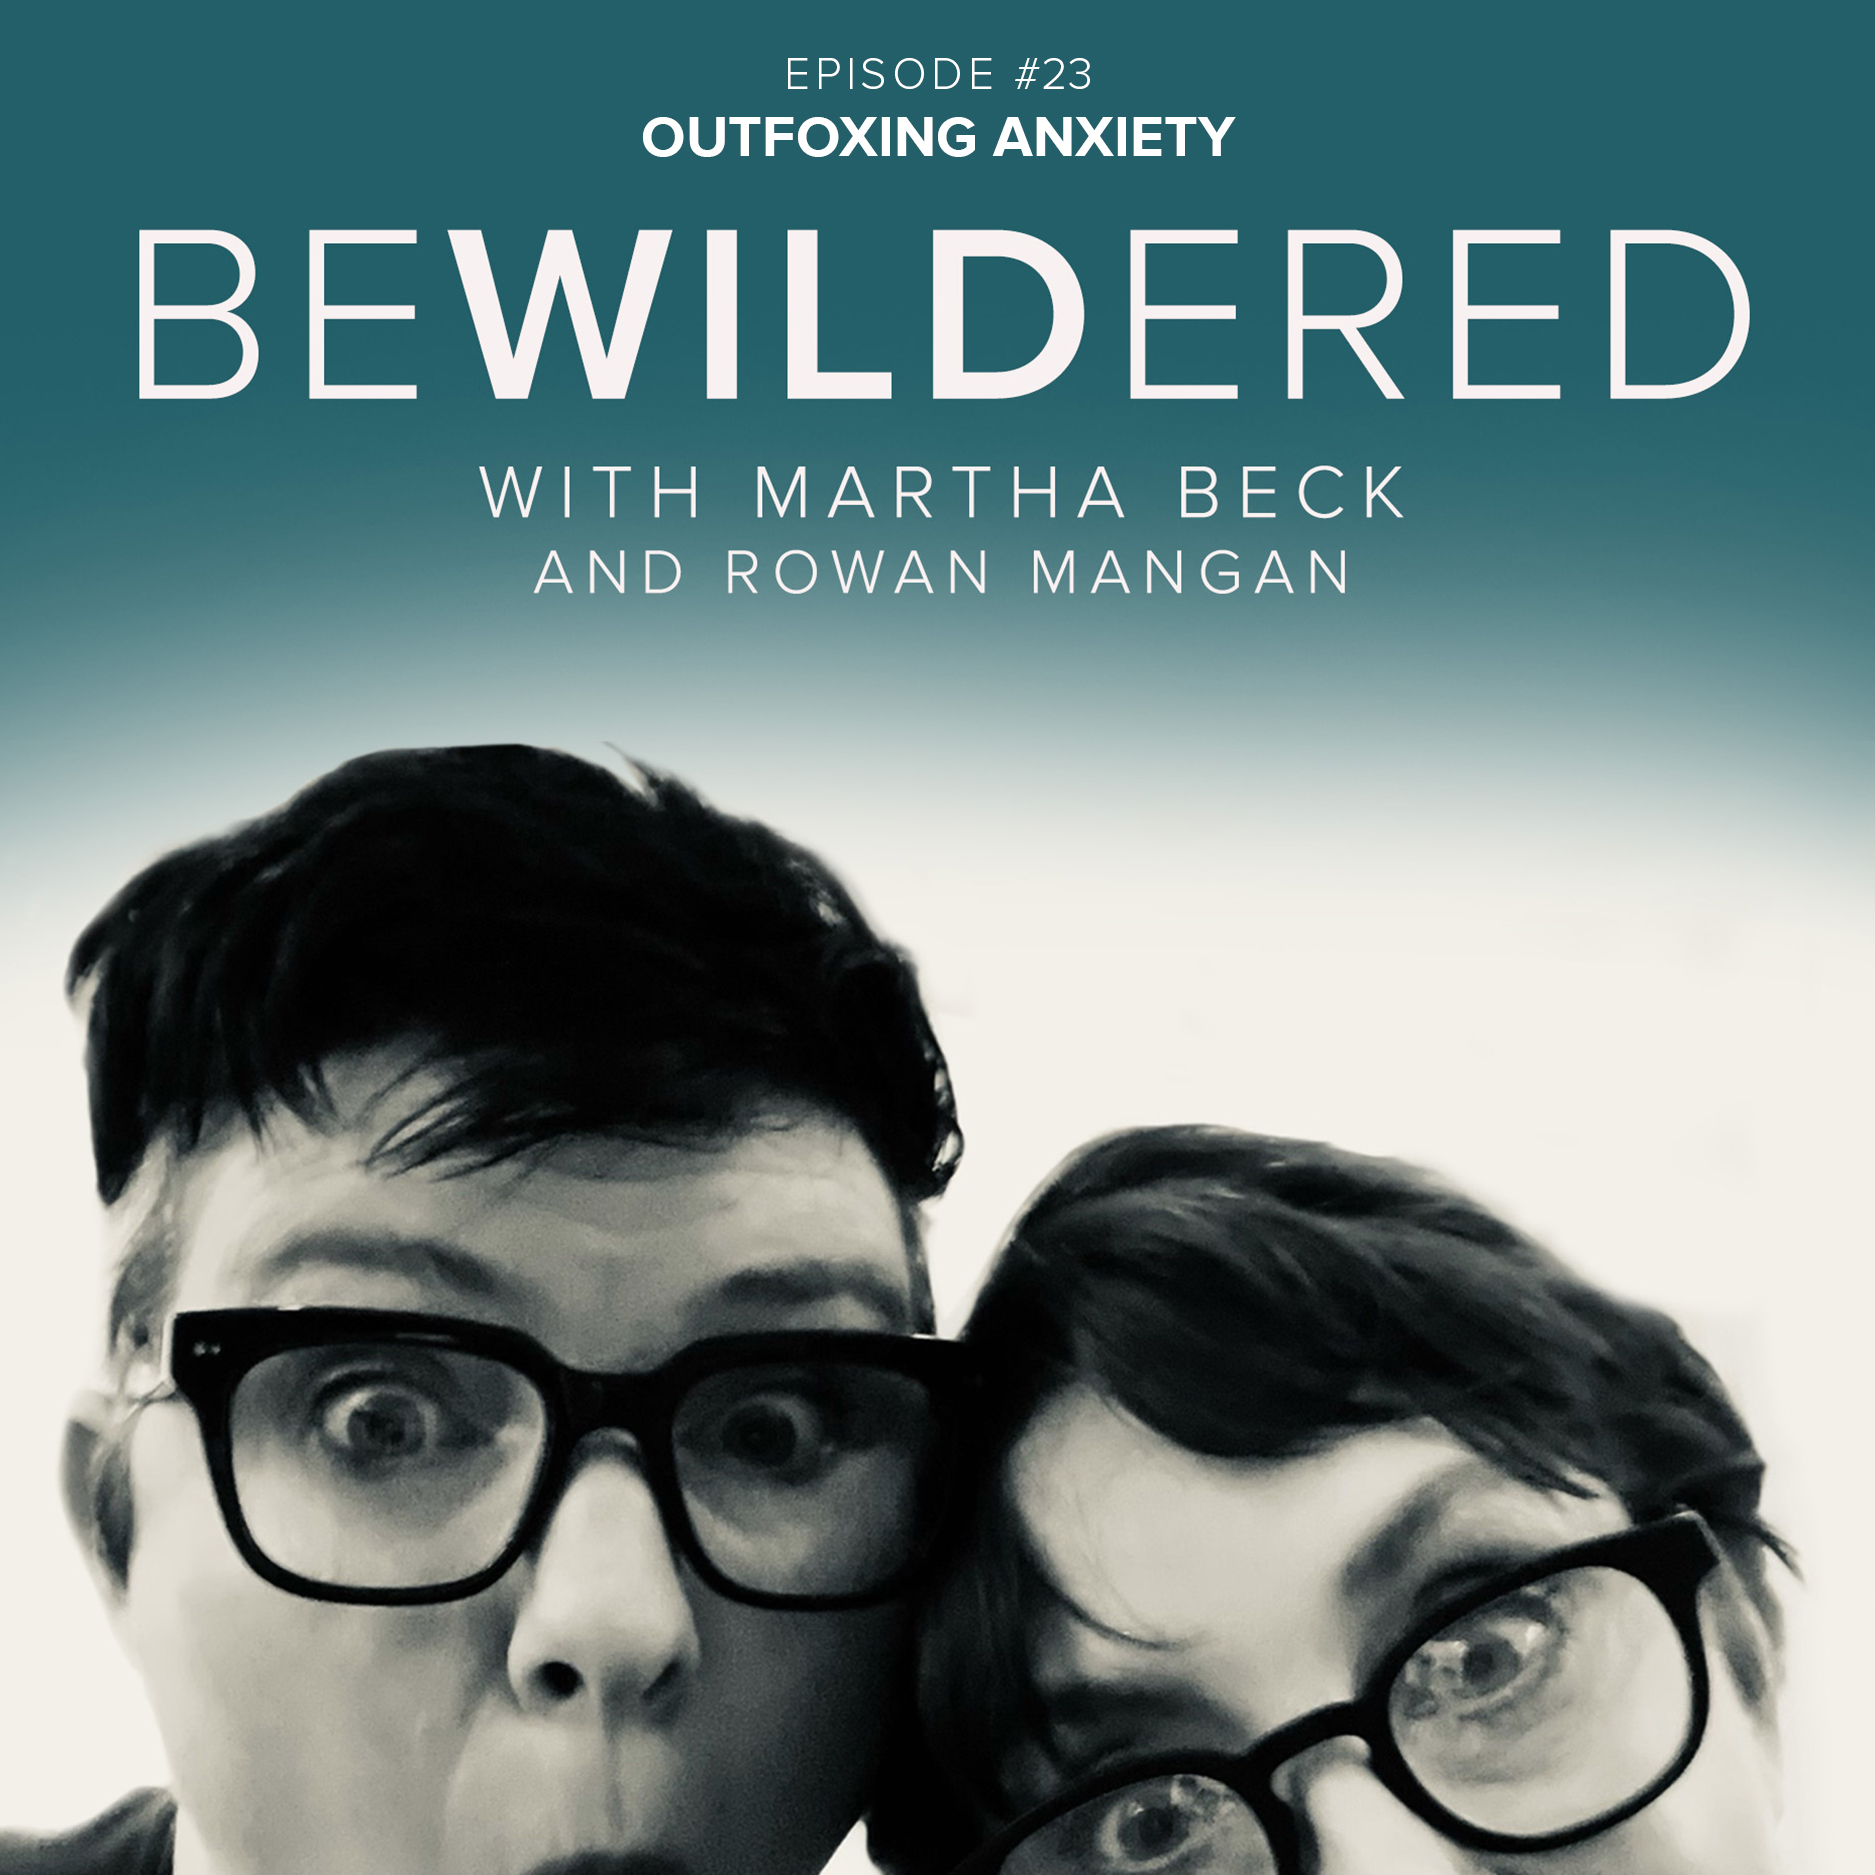 Image for Episode #23 Outfoxing Anxiety for the Bewildered Podcast with Martha Beck and Rowan Mangan